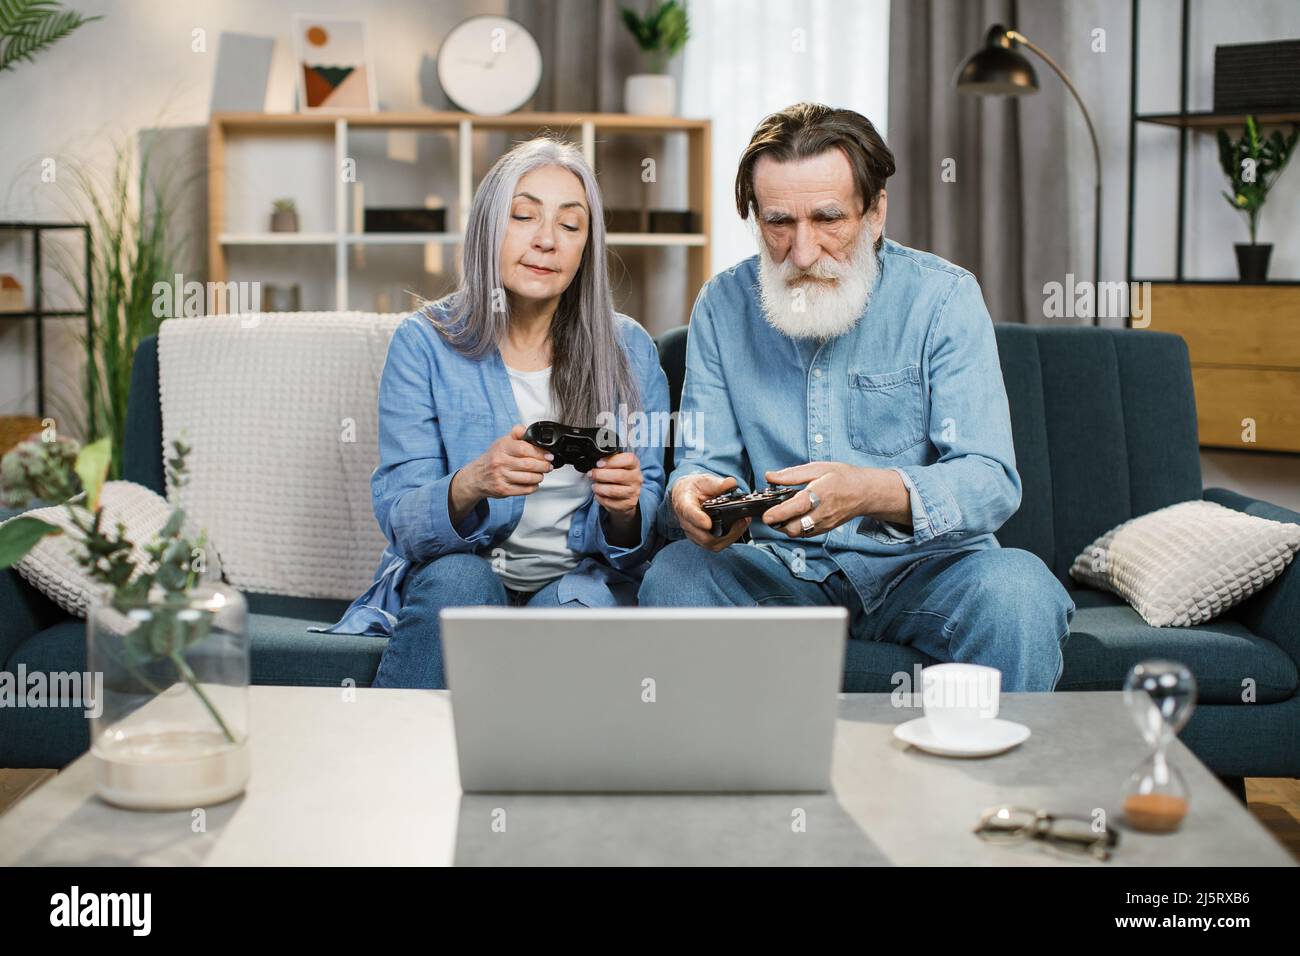 Joyful mature married couple with wireless joysticks in hands playing video games while sitting on comfy couch photo